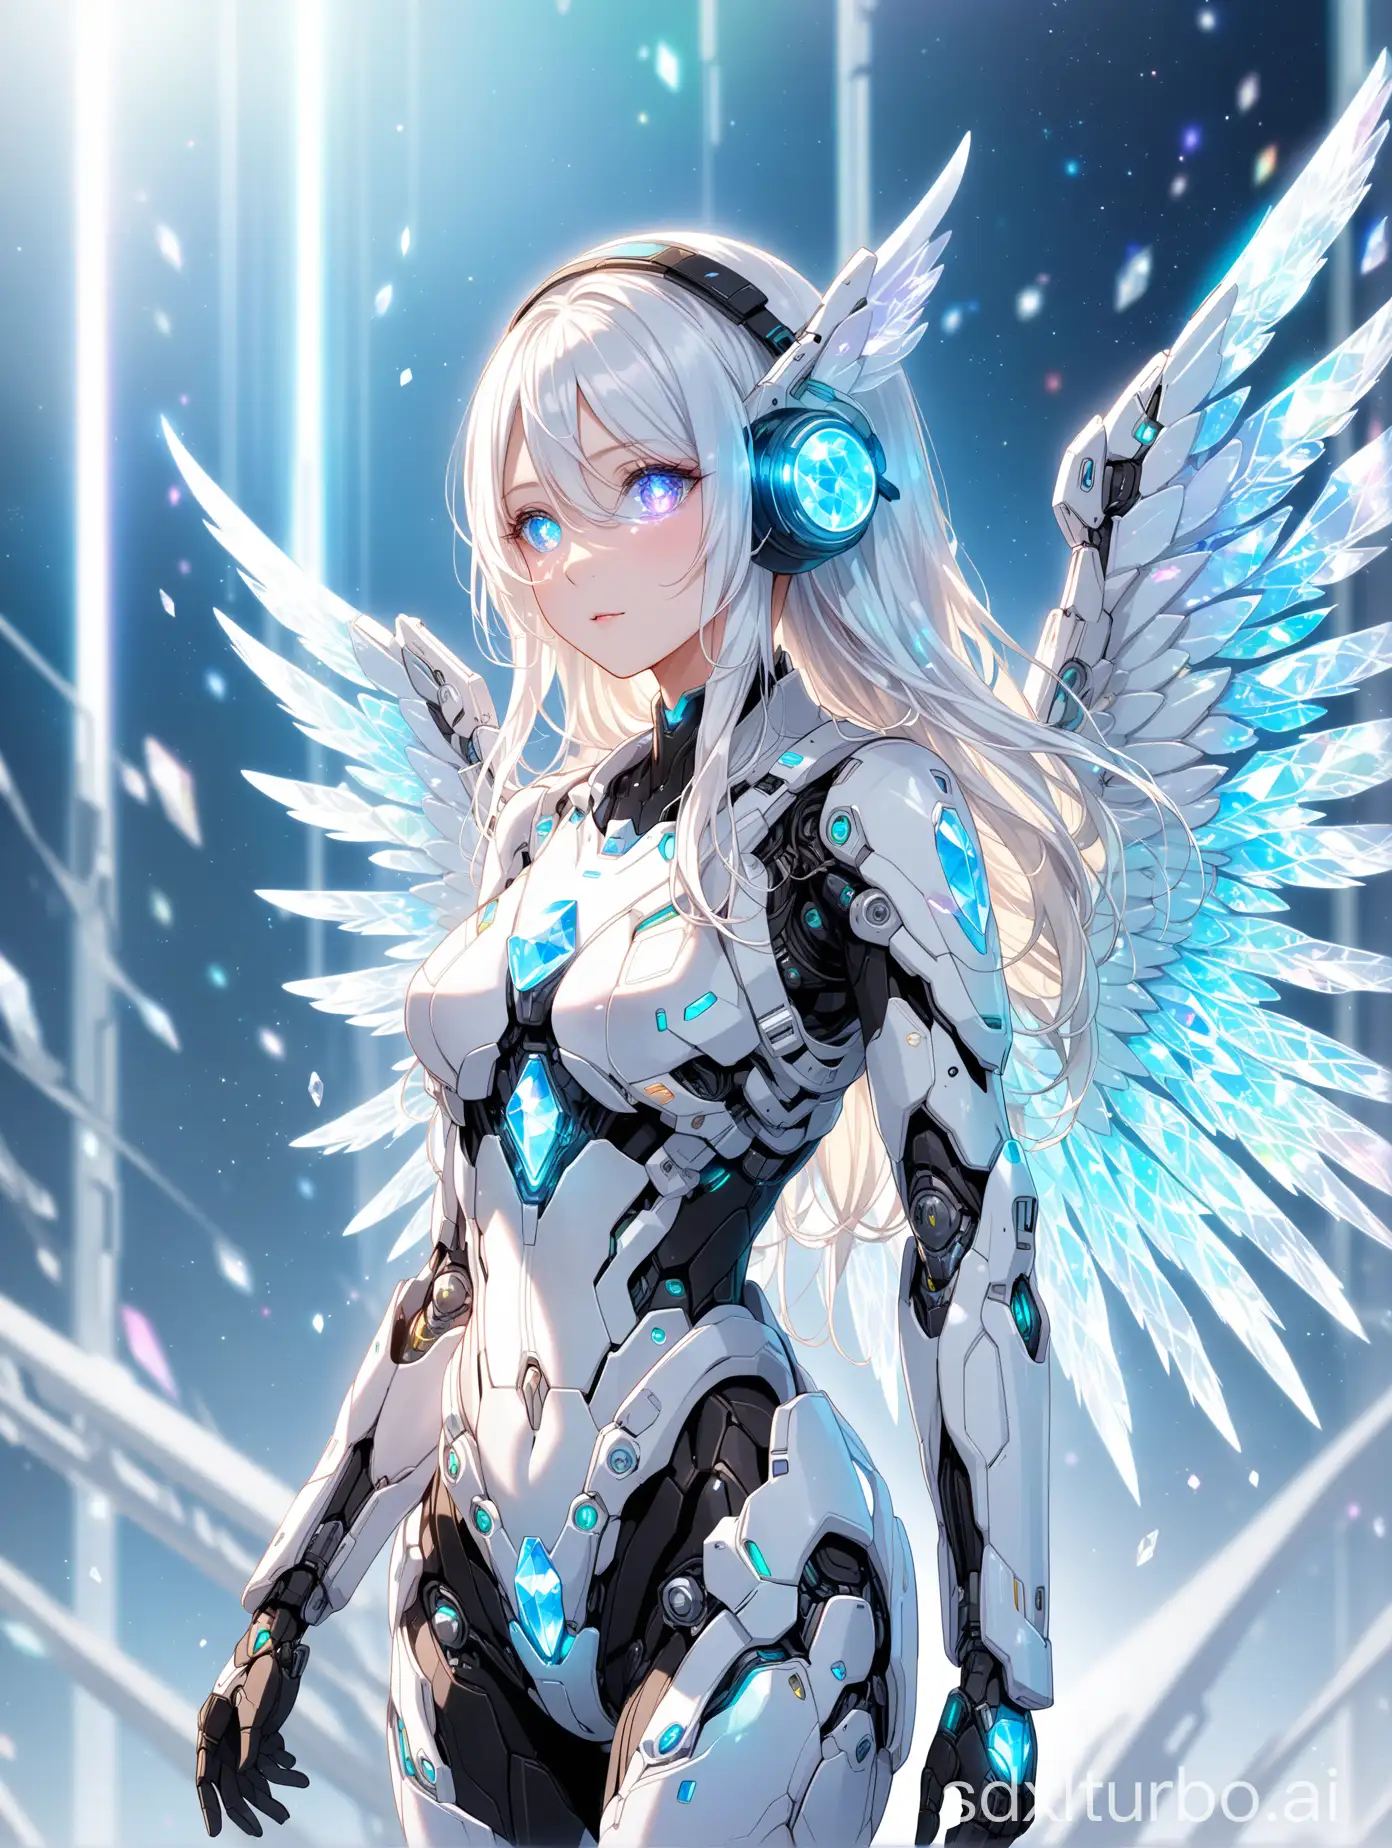 Futuristic-Angelic-Woman-with-Crystal-Wings-in-AnimeStyle-Masterpiece